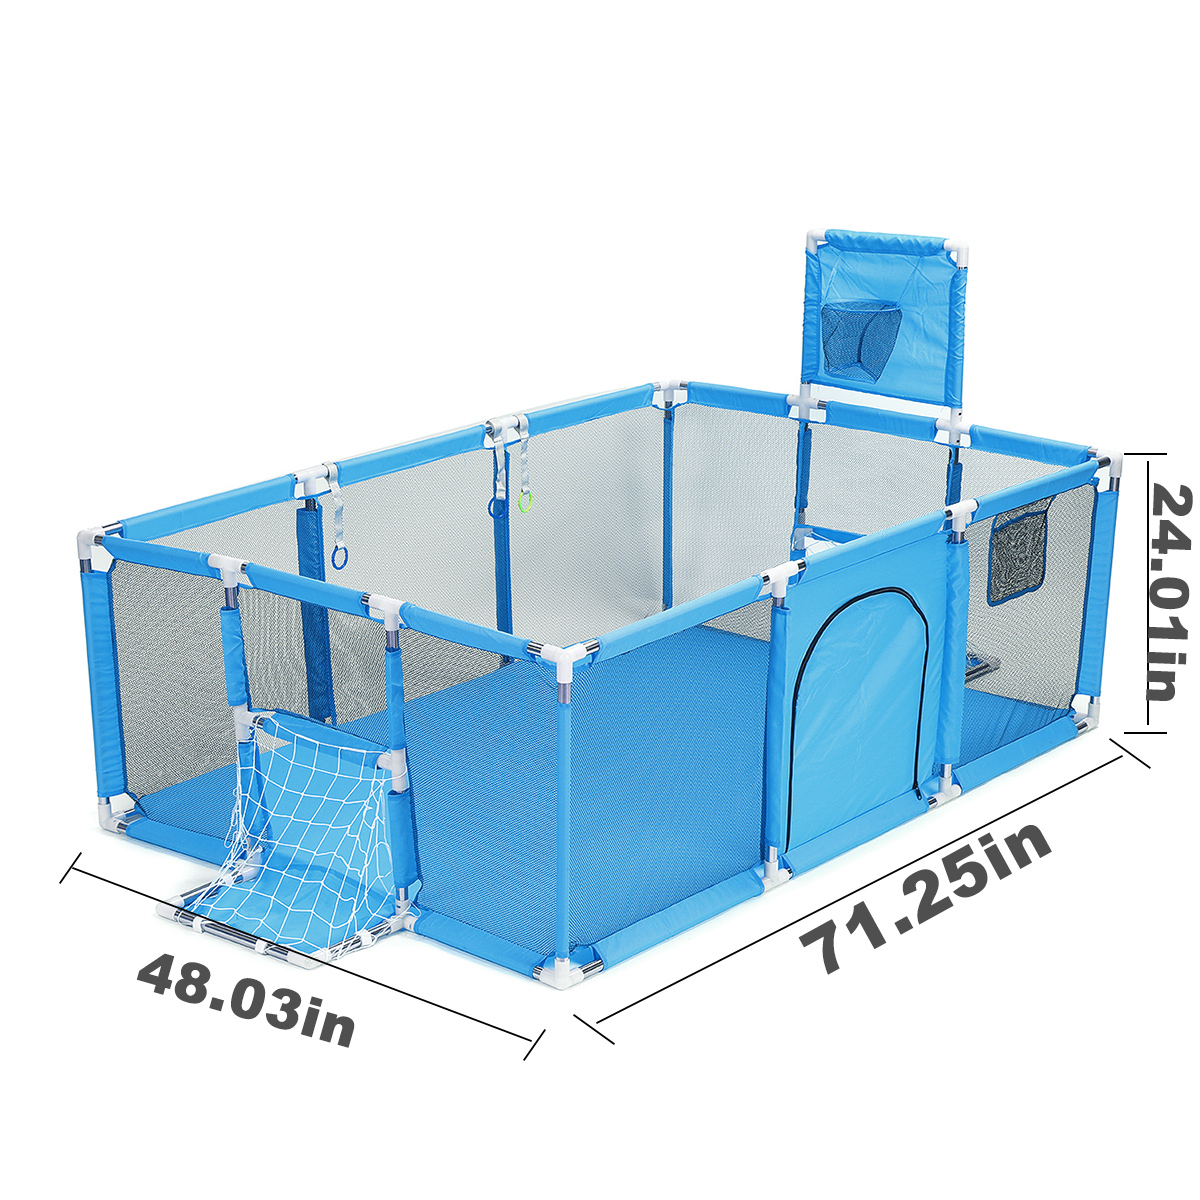 3-in-1-Baby-Playpen-Interactive-Safety-Indoor-Gate-Play-Yards-Tent-Basketball-Court-Kids-Furniture-f-1693785-20